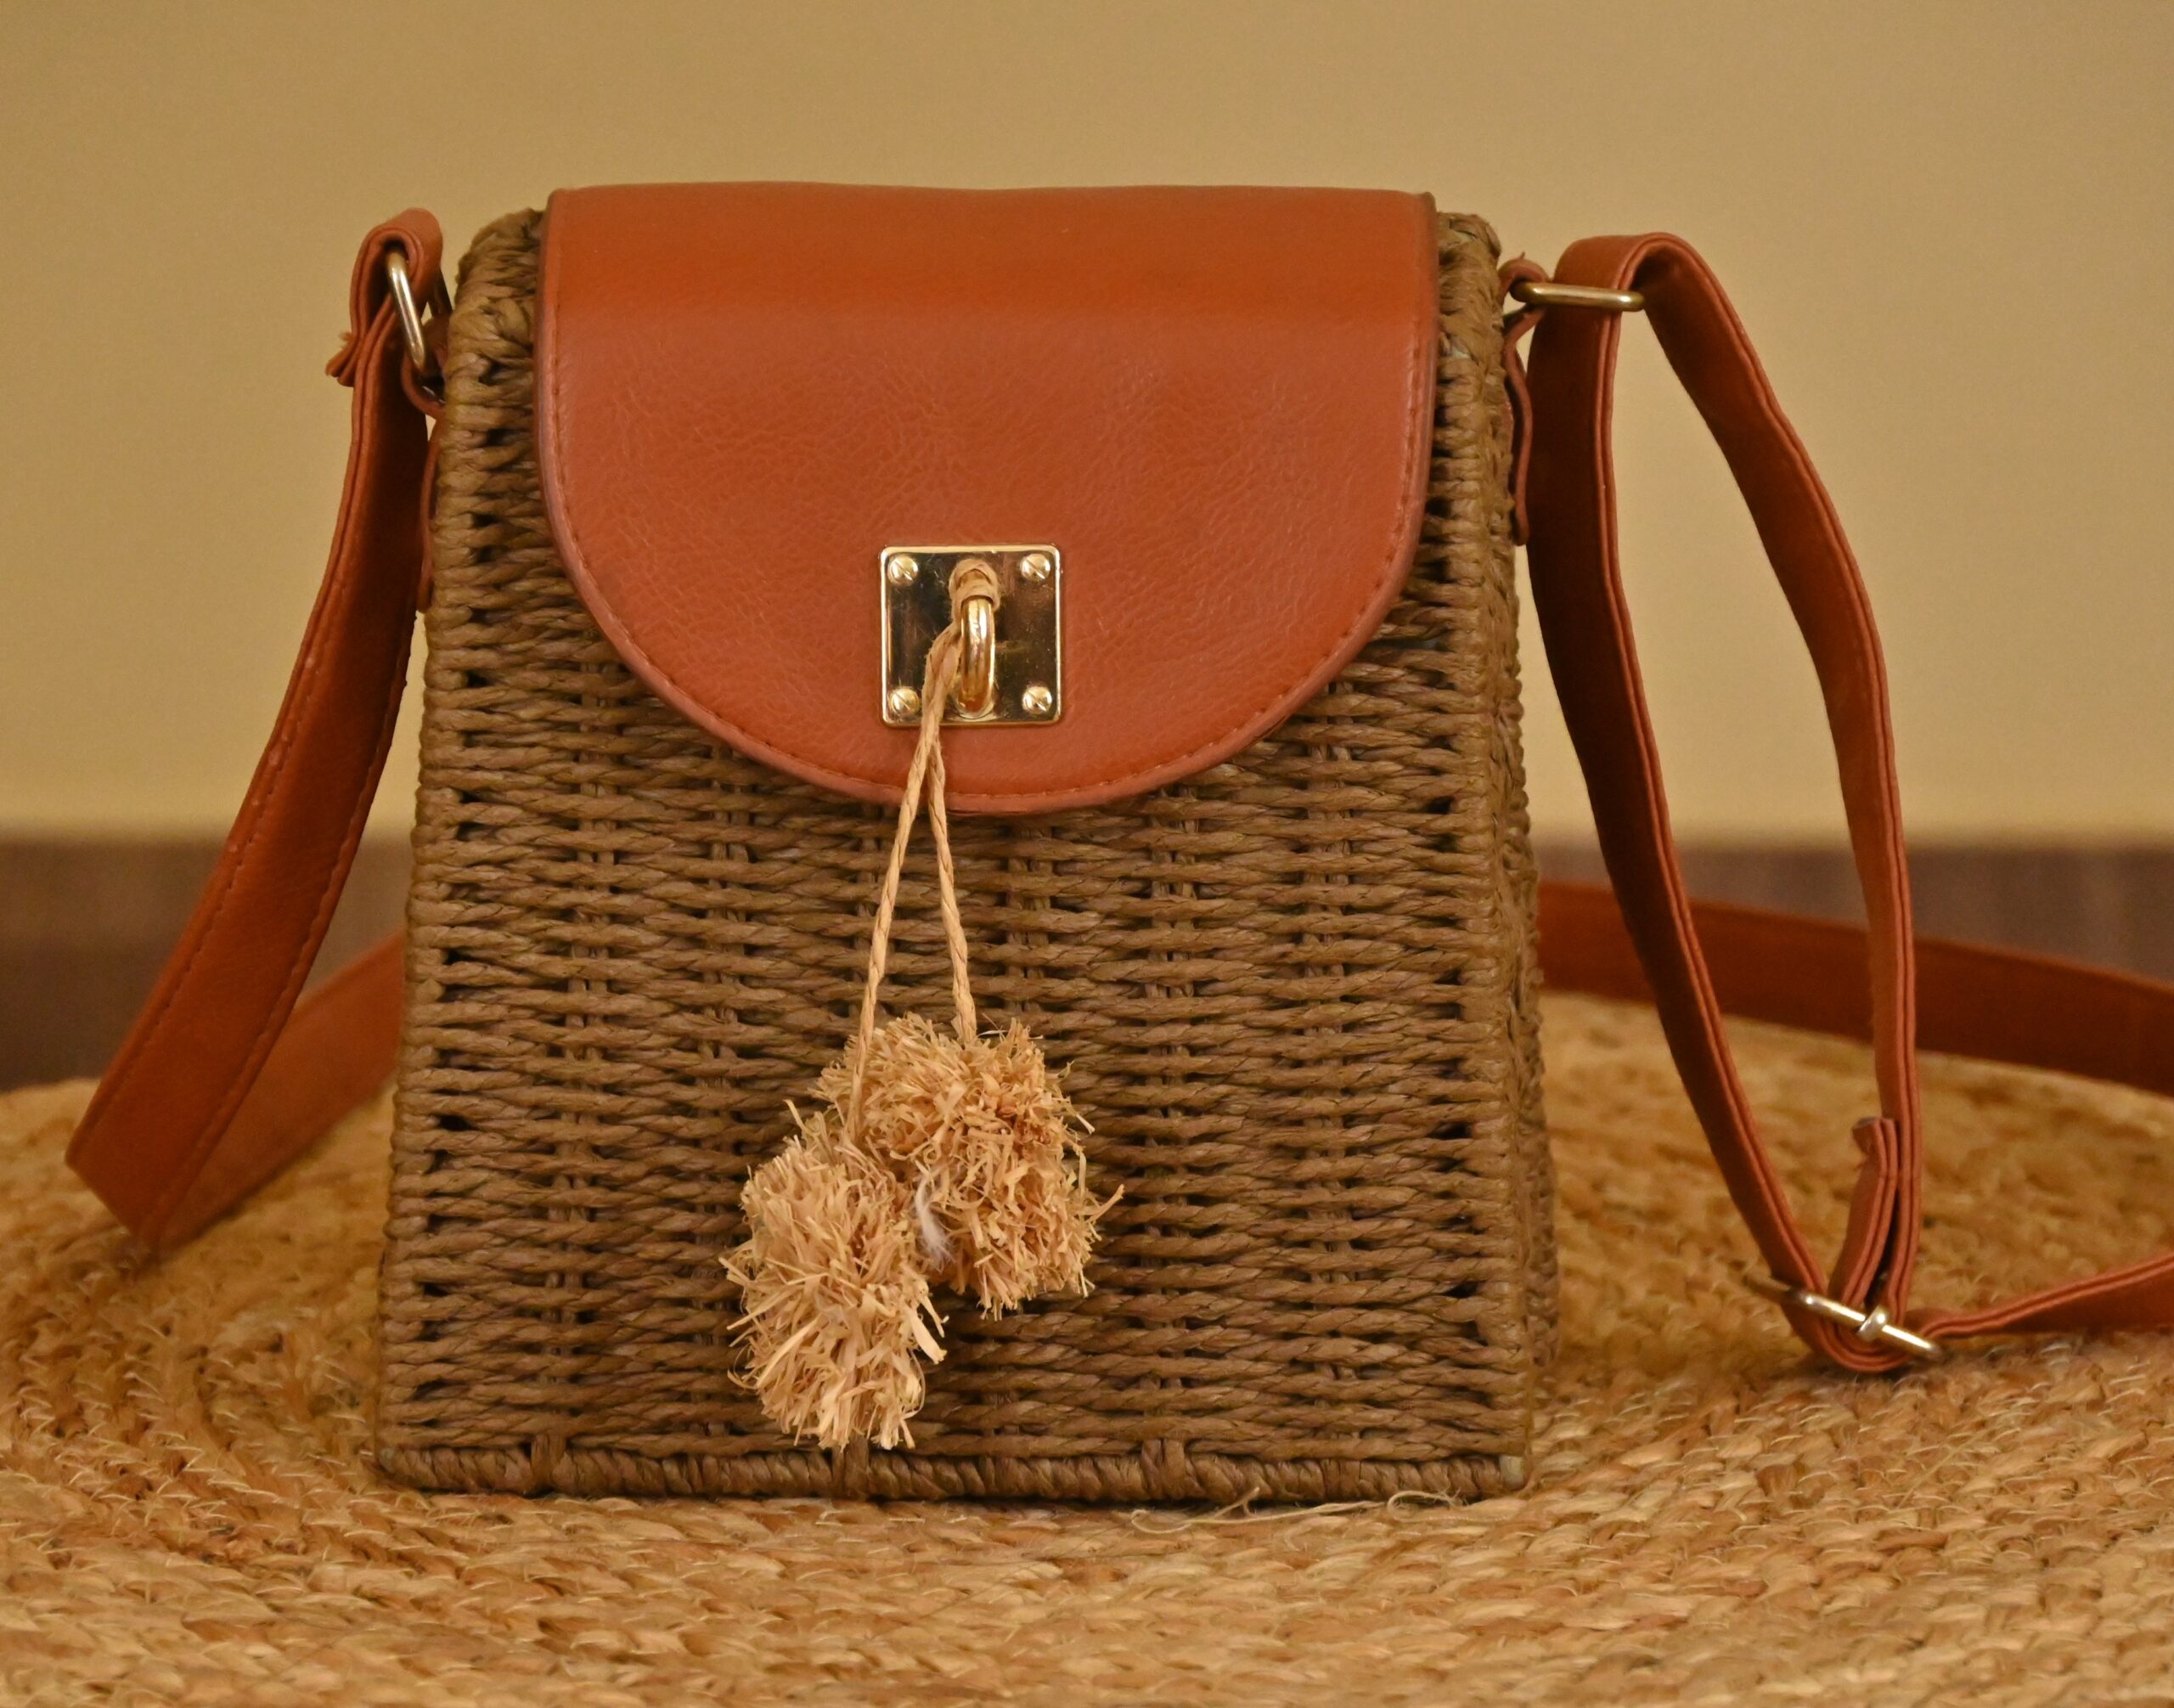 Woven Straw Tote Bag with Extra long Hand Shredded Natural Straw